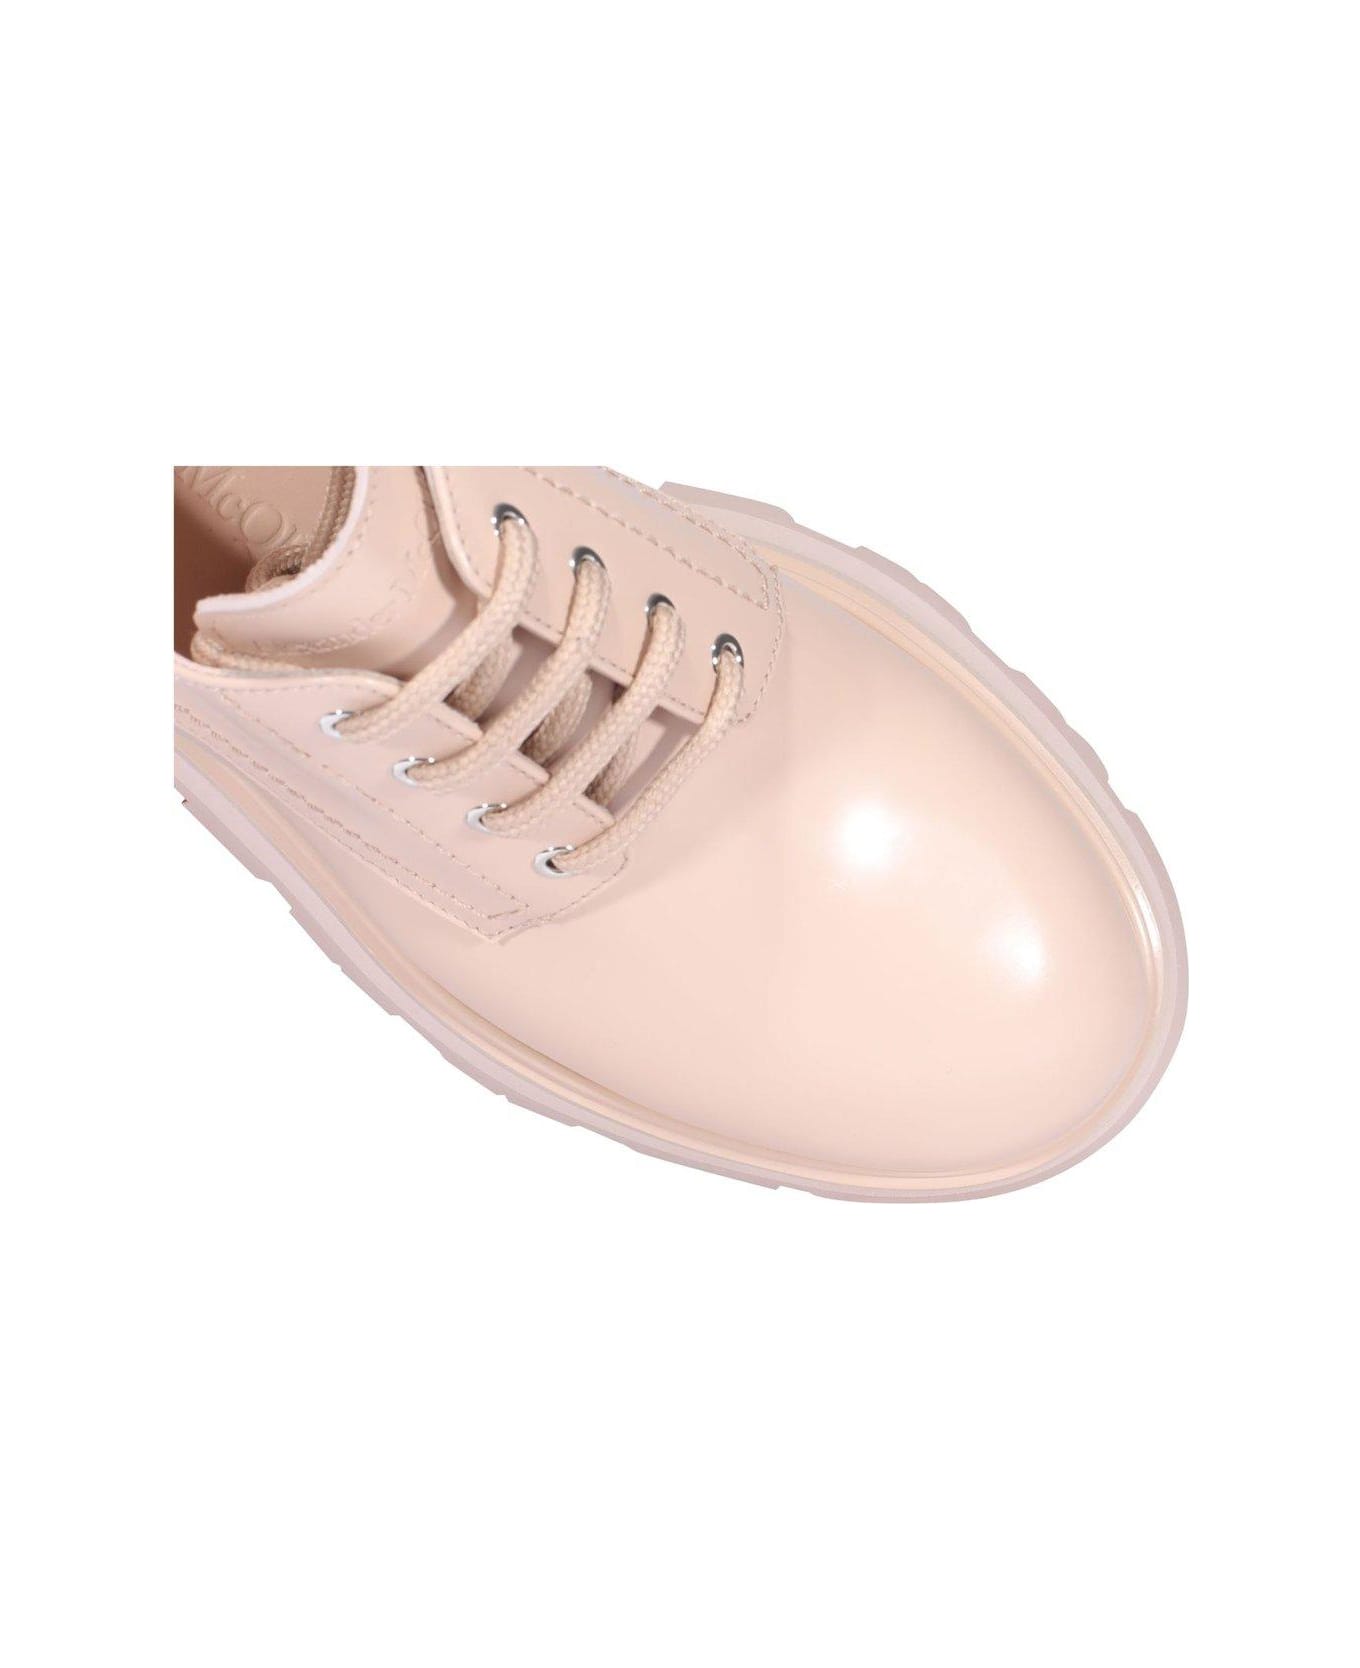 Alexander McQueen Wander Lace-up Shoes - Pink ウェッジシューズ